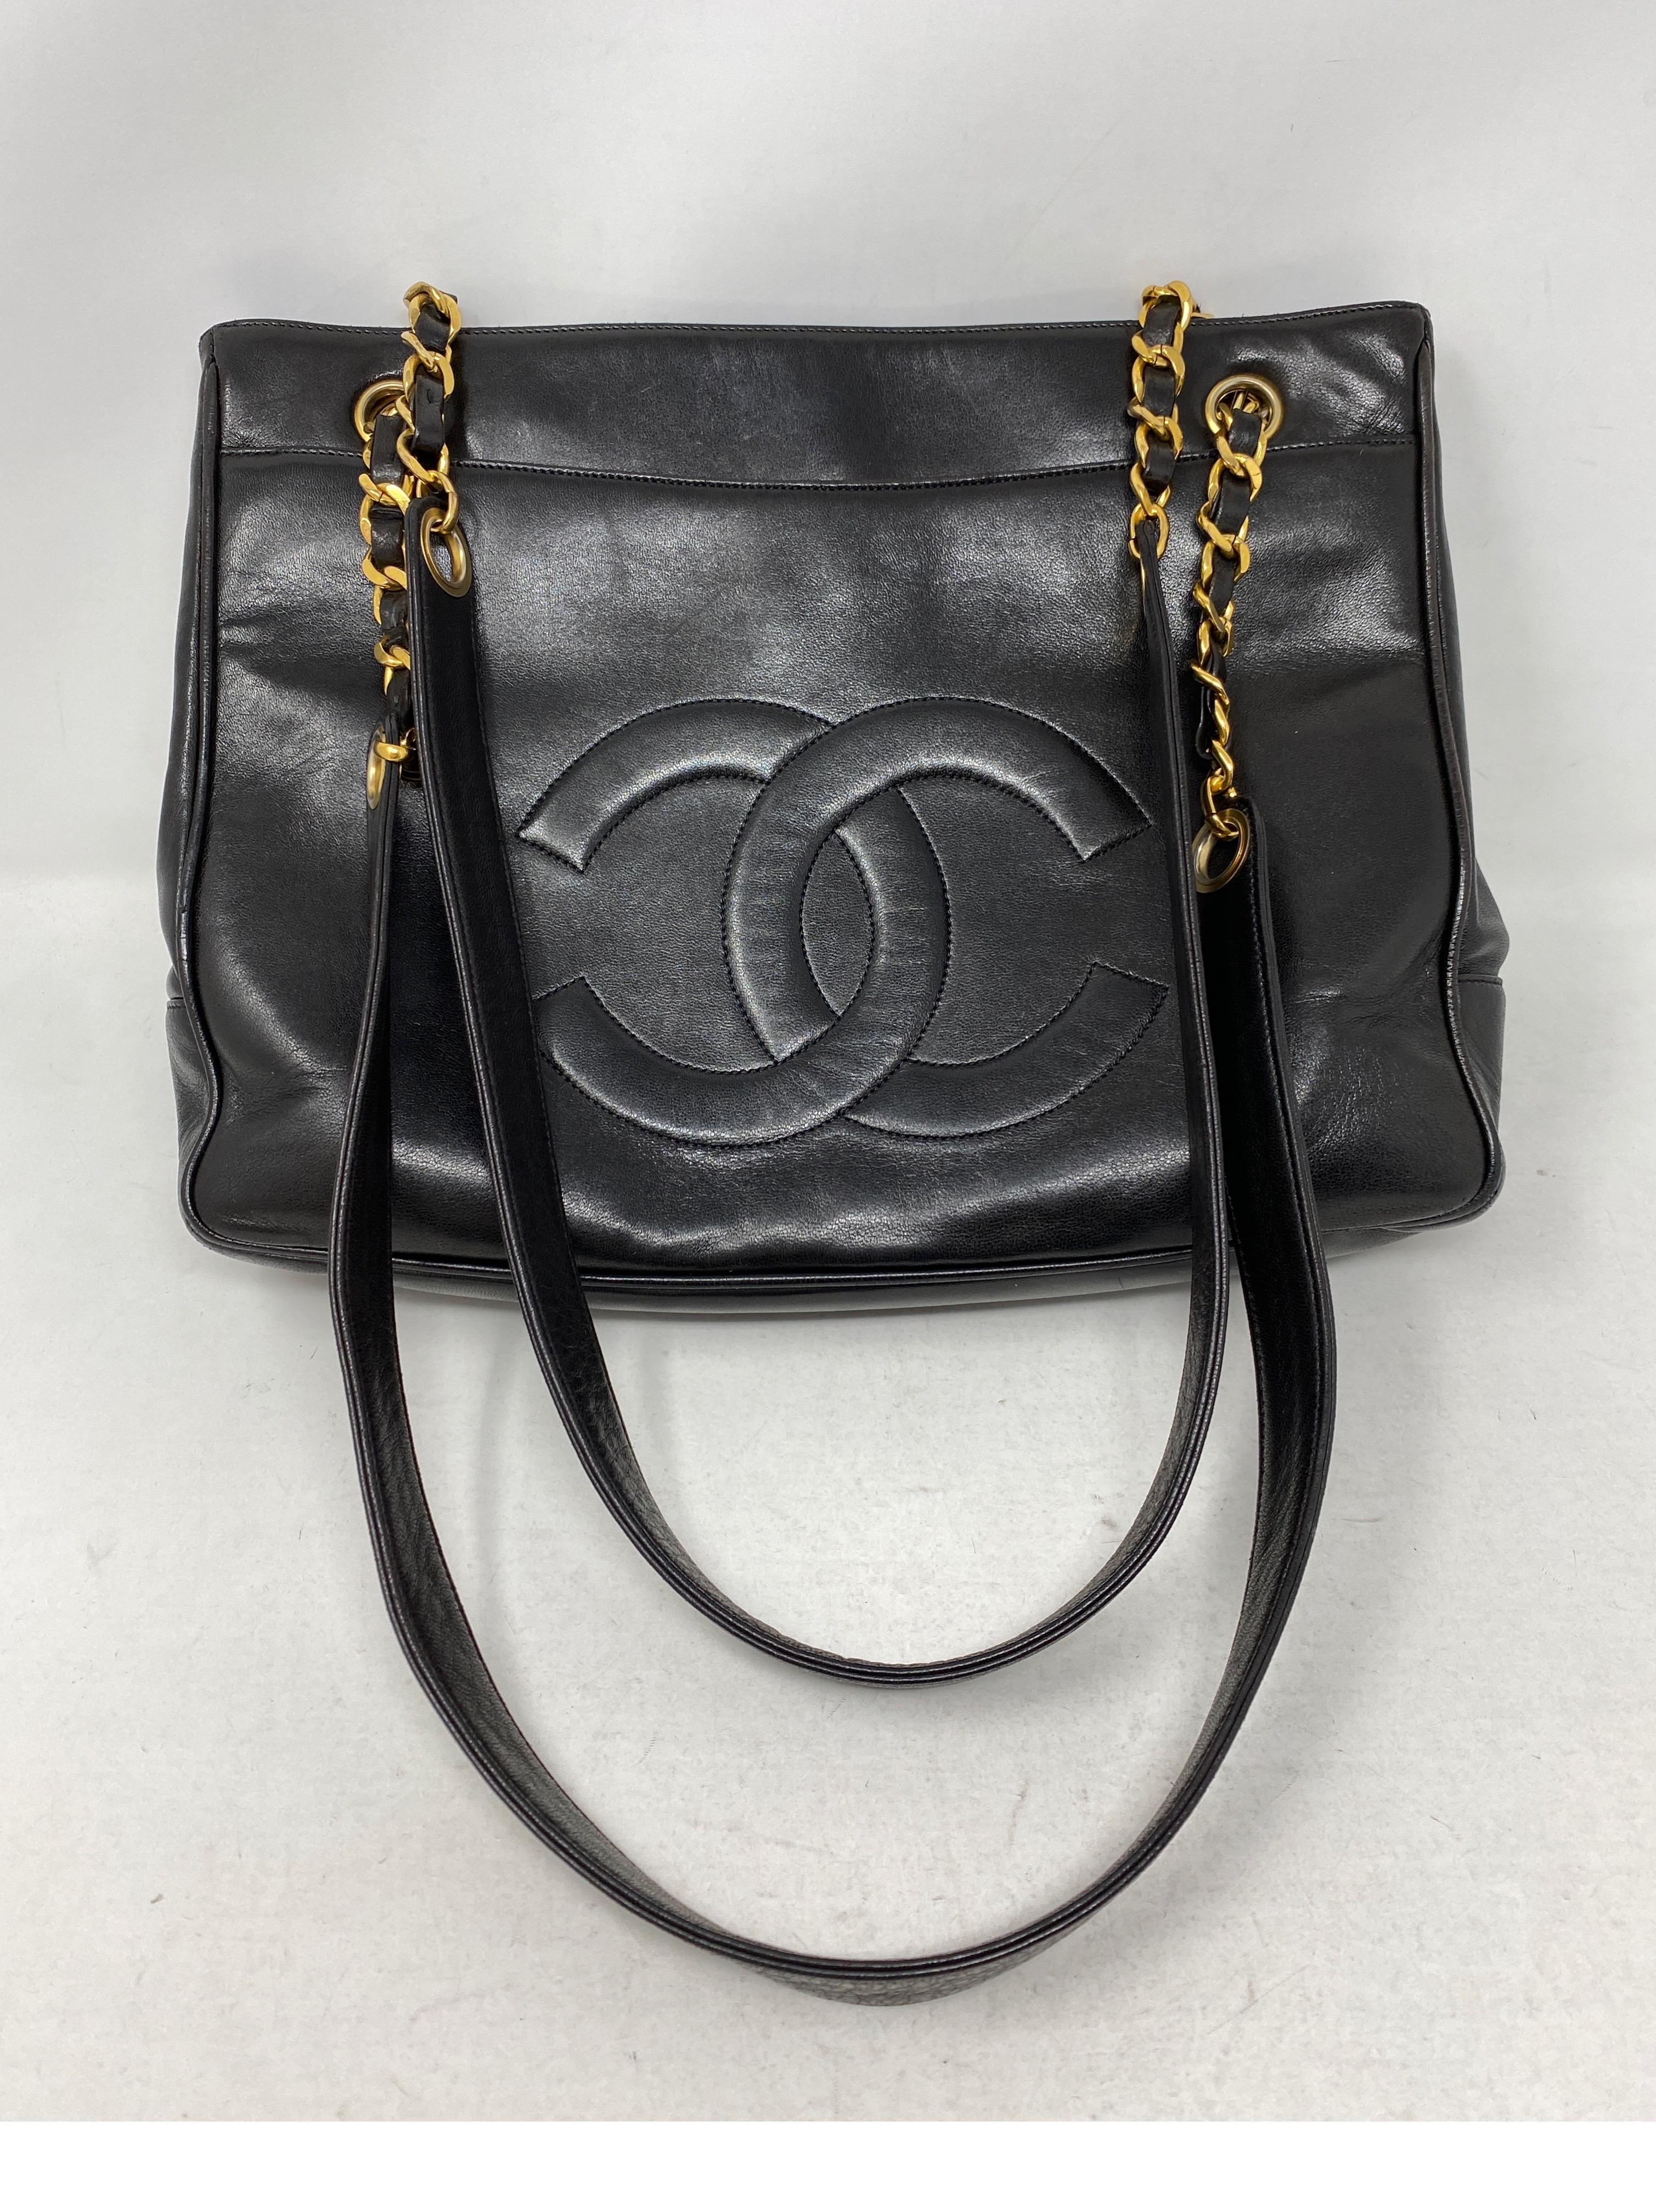 1990s Chanel Black Leather Tote Bag 6